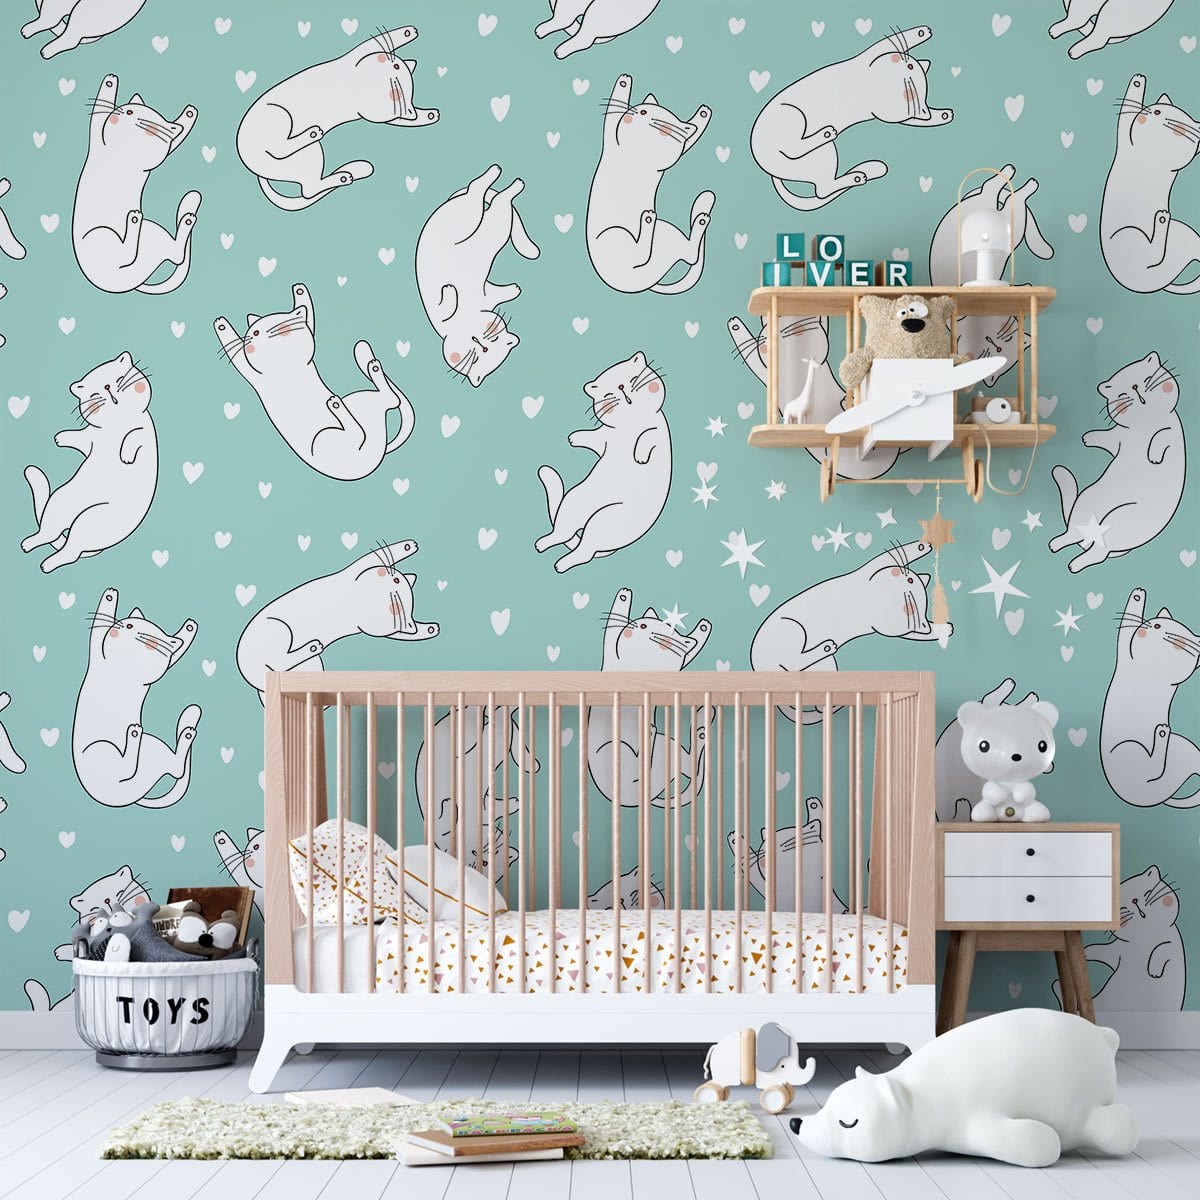 Stretching Cats Wallpaper Mural